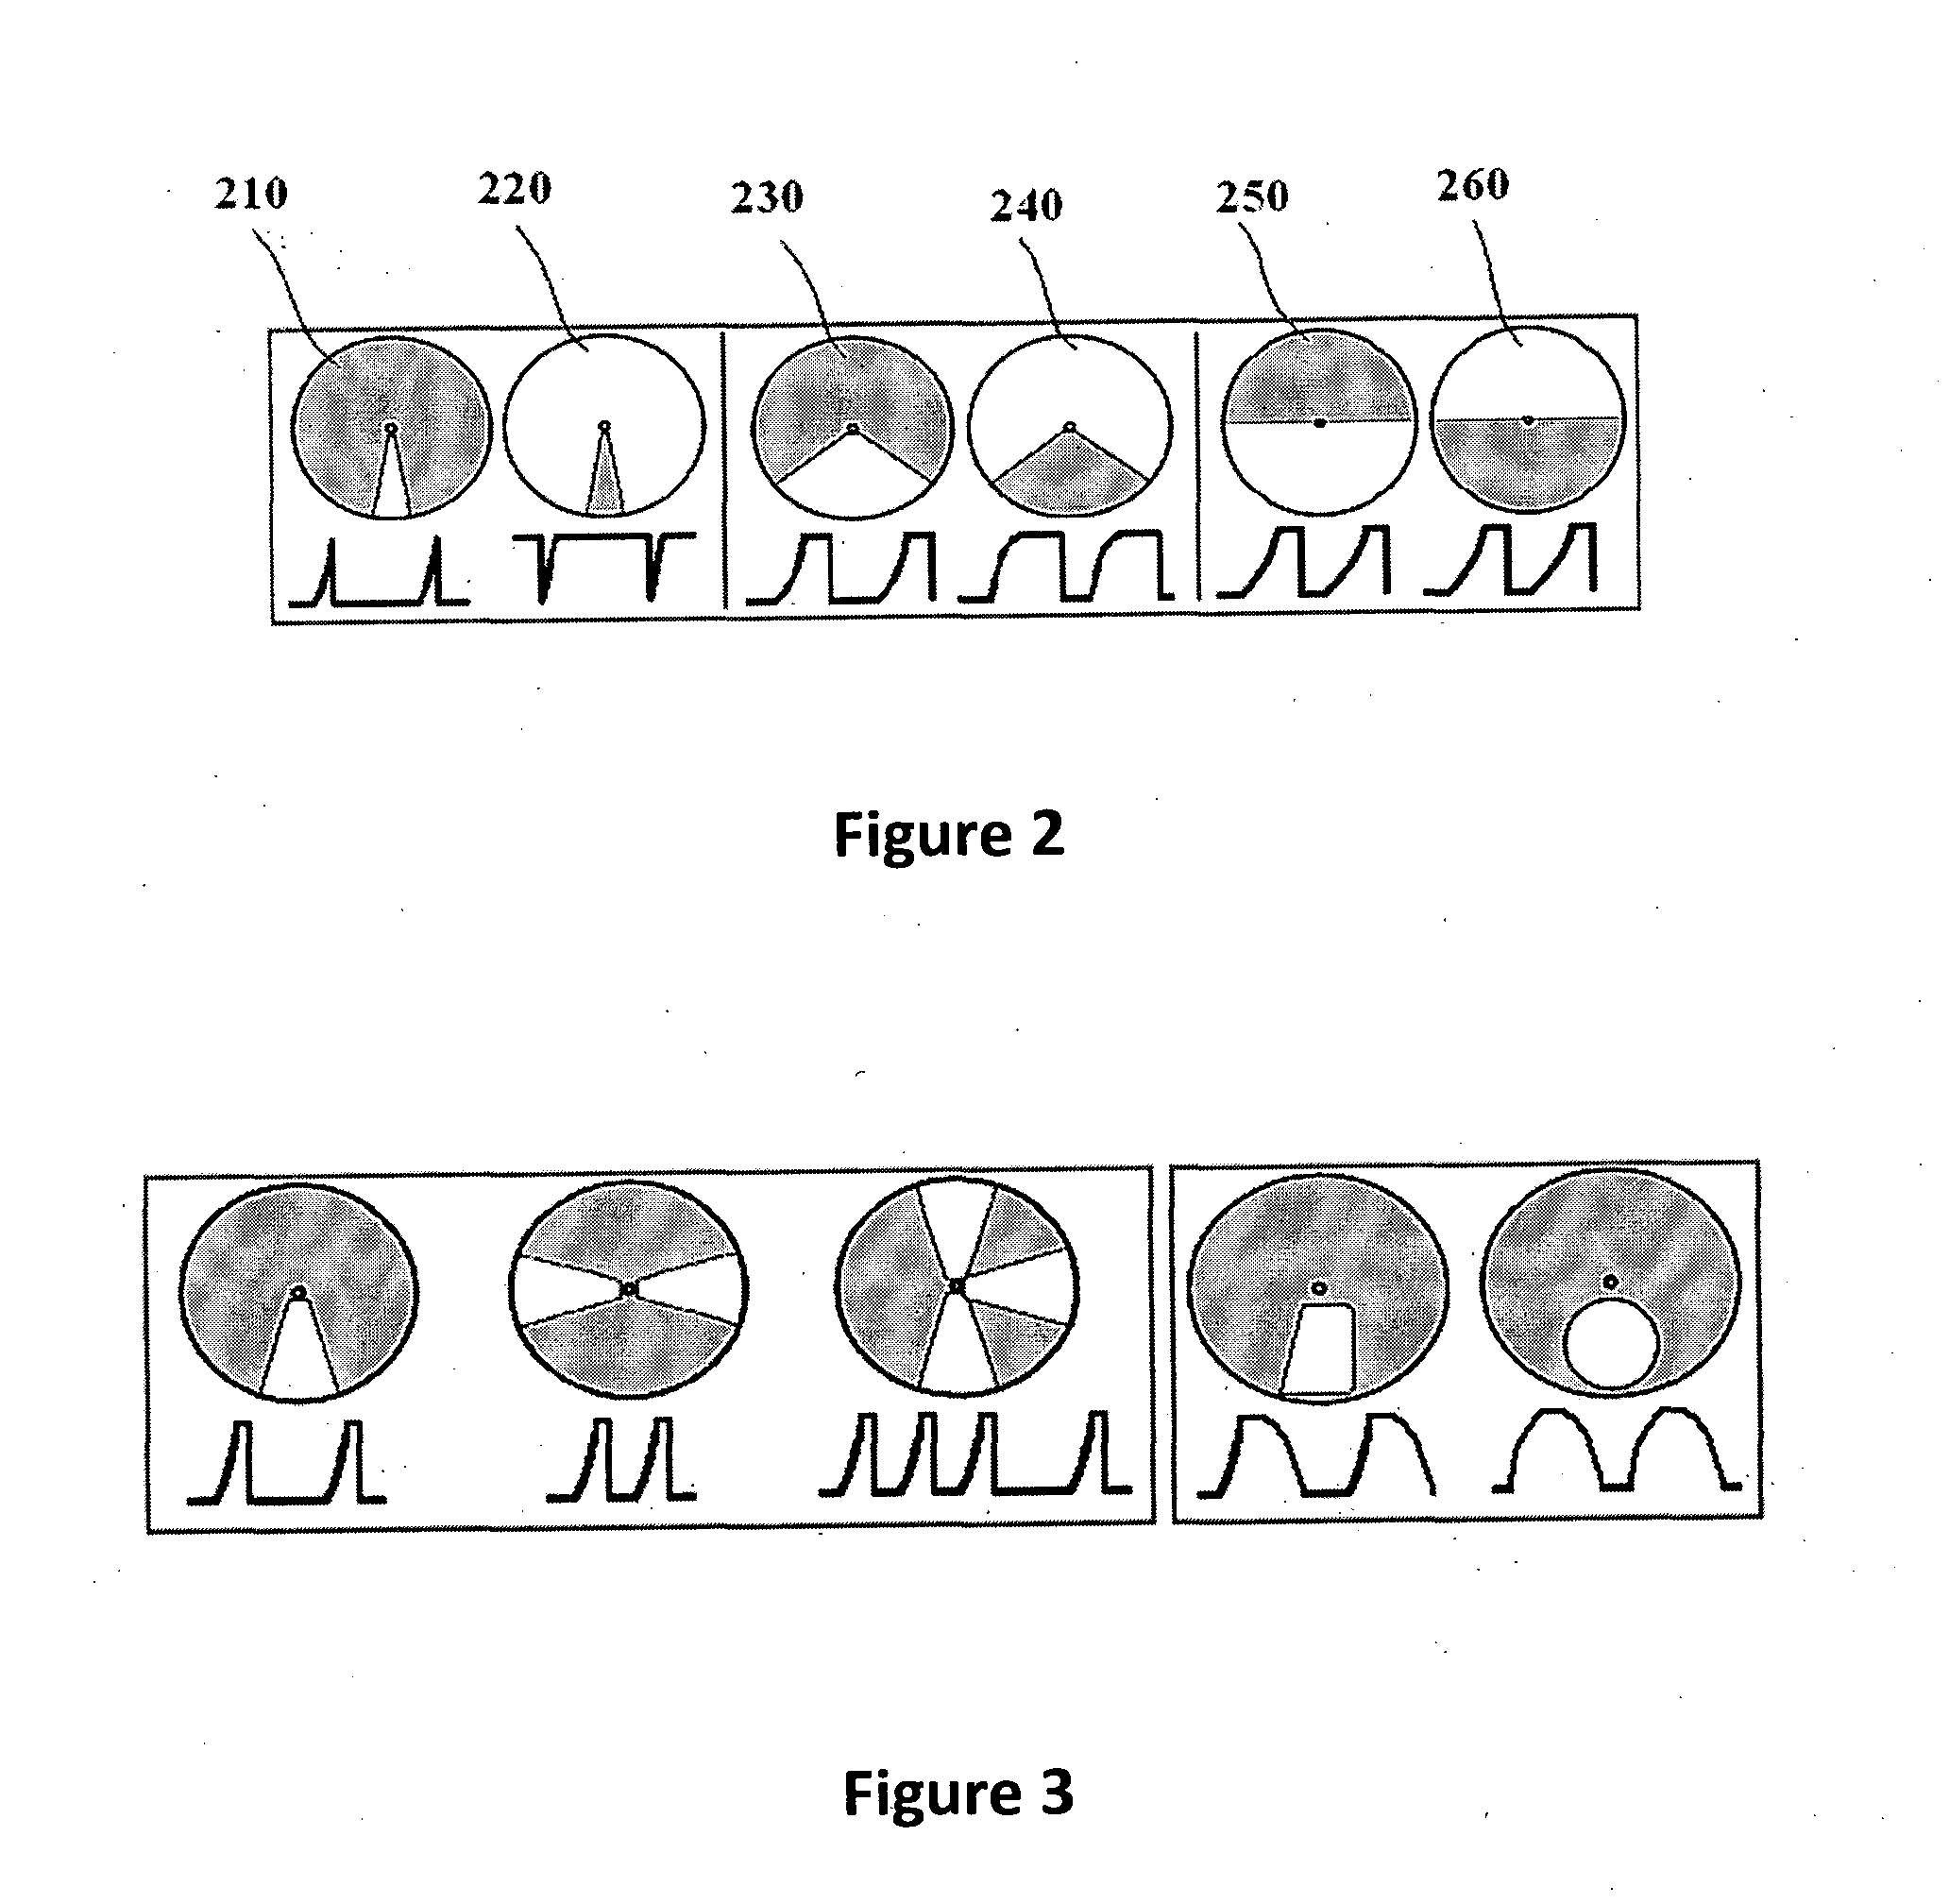 Device and Methods for Applying Therapeutic Protocols to Organs of the Cardiopulmonary System